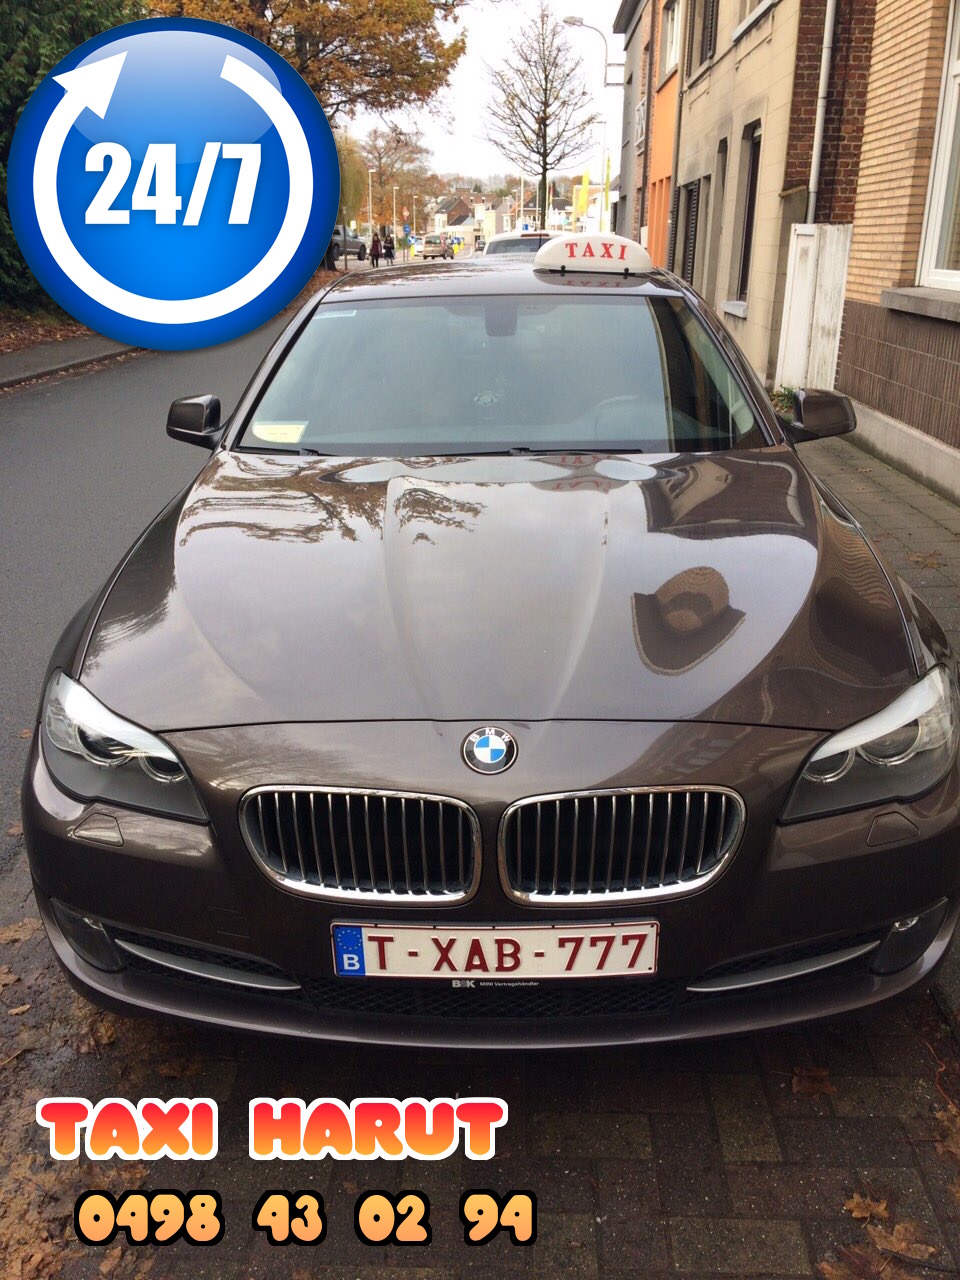 aalst-taxi-service-vip-airport-gare-lille-Oilsjt